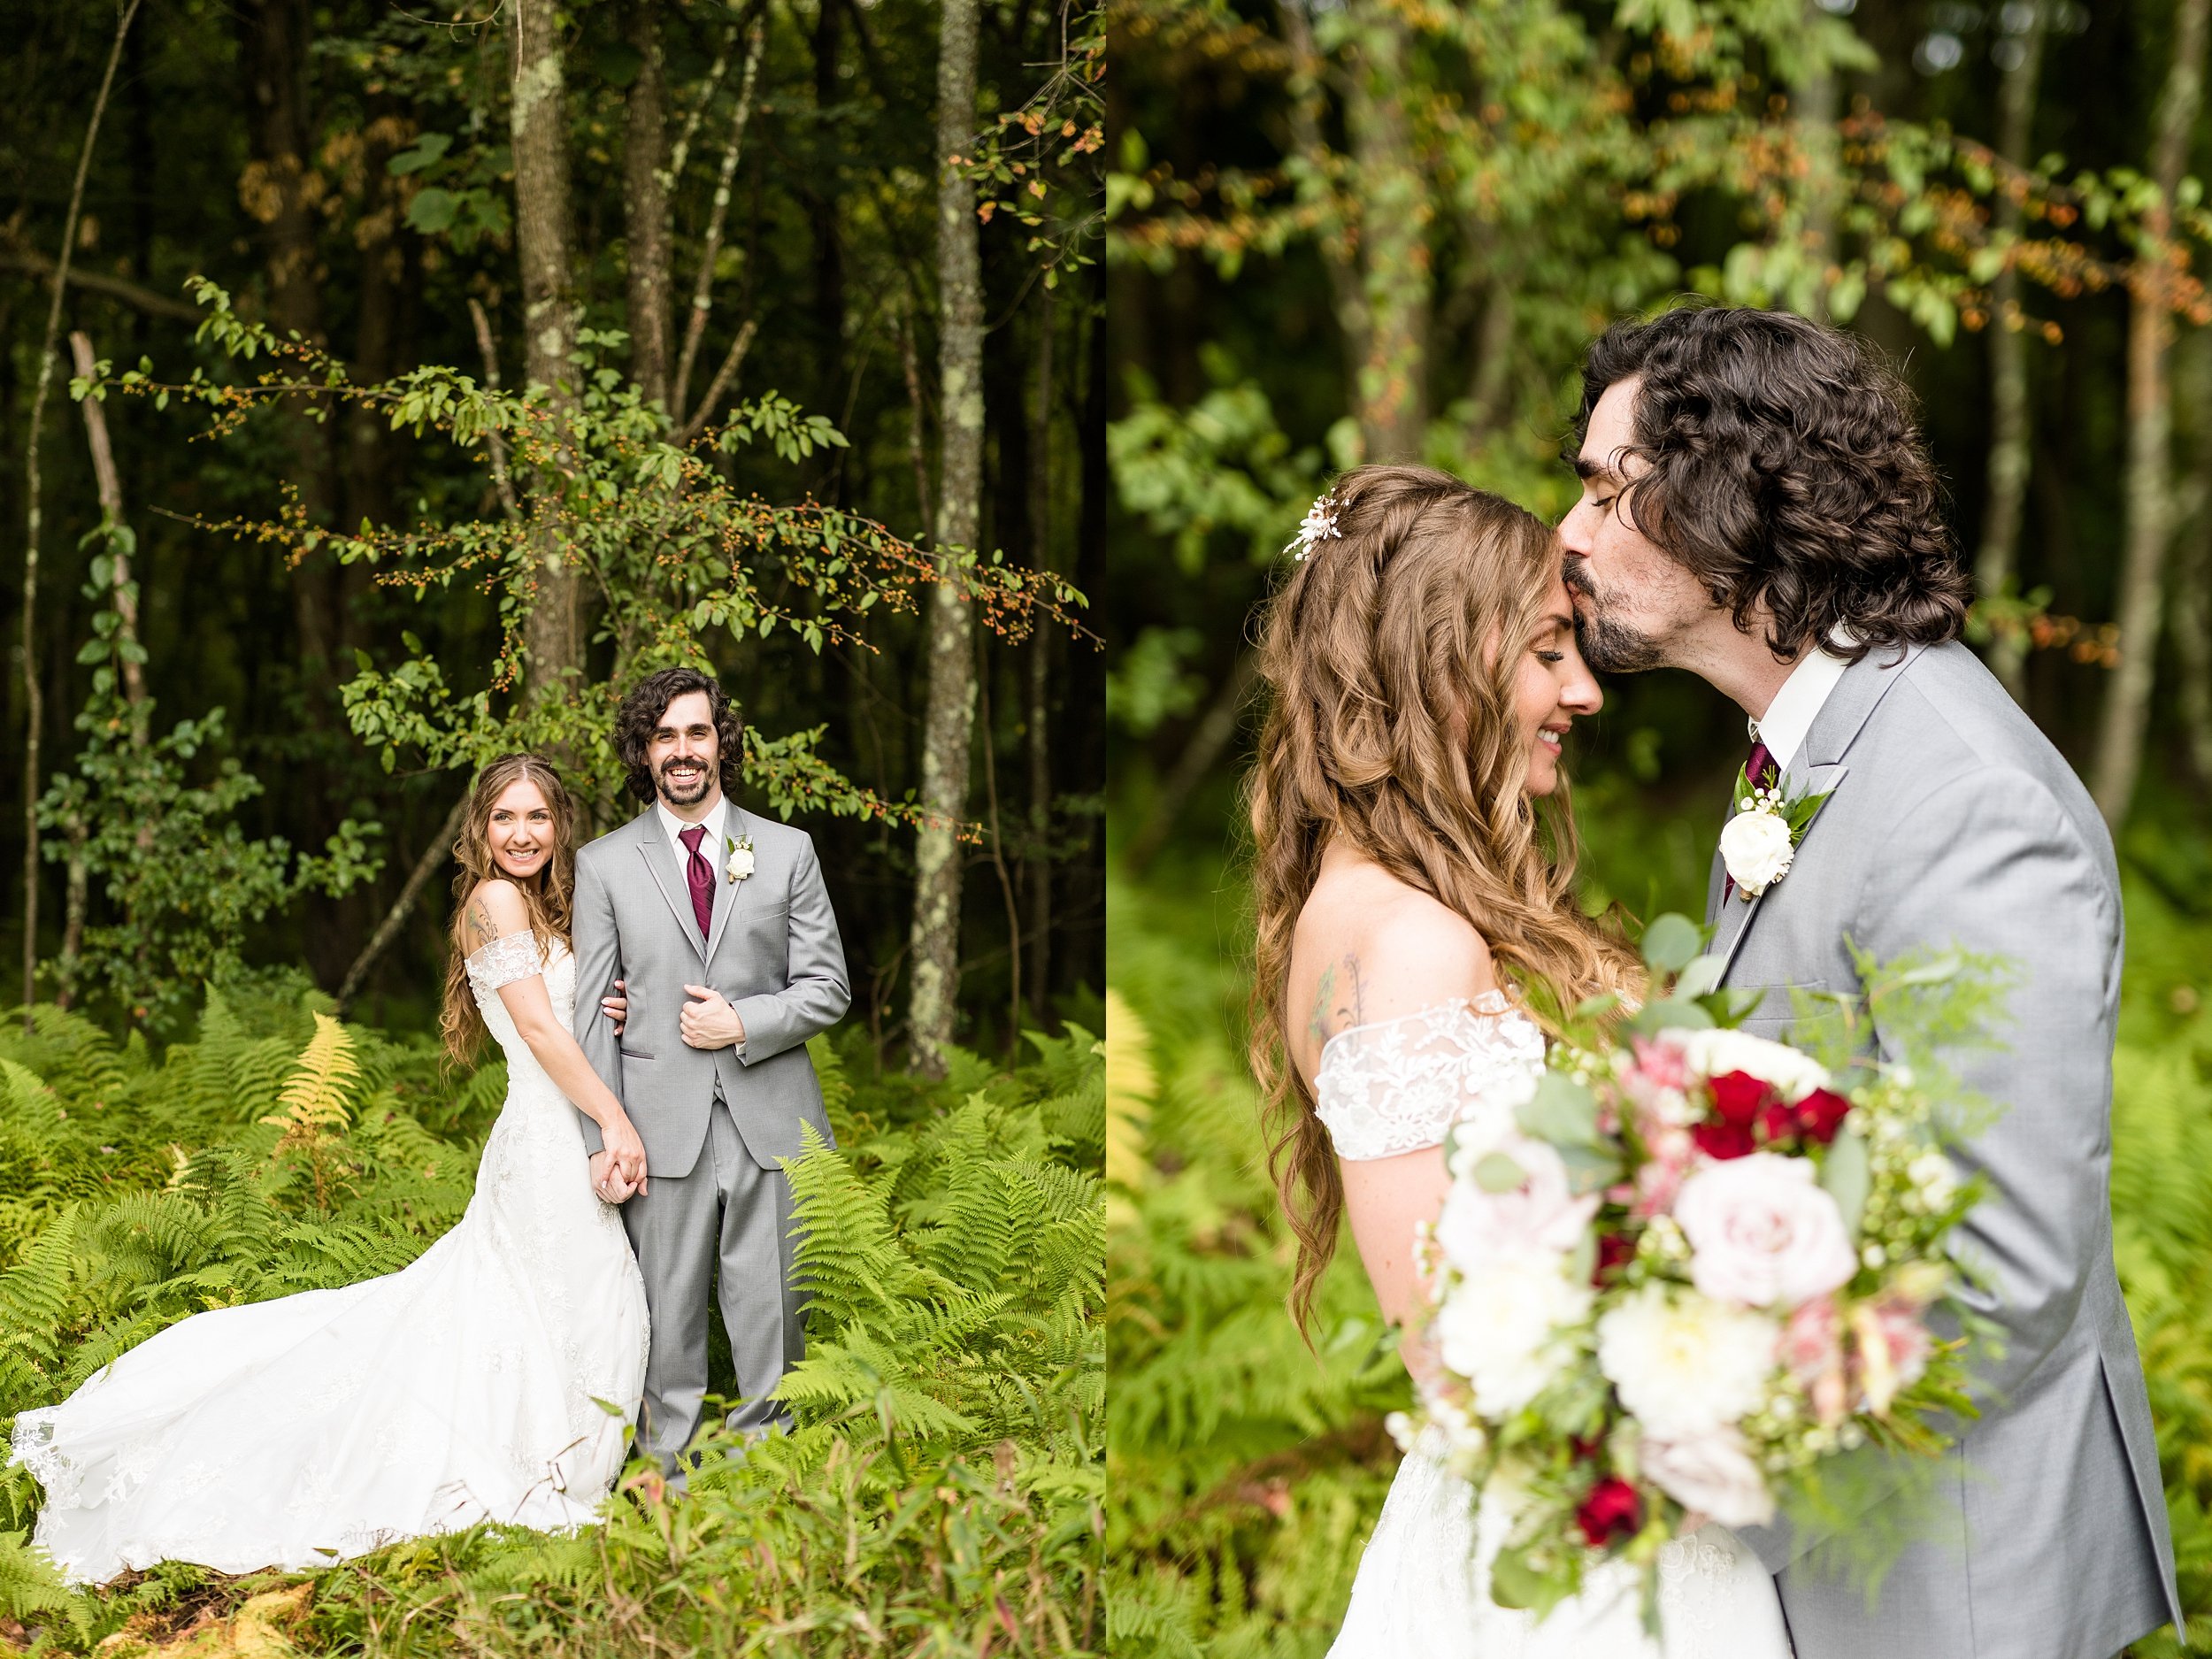 pinehall at eisler farms wedding photos, butler wedding venues, lord of the rings inspired wedding, book lover wedding inspiration, pittsburgh wedding photographer